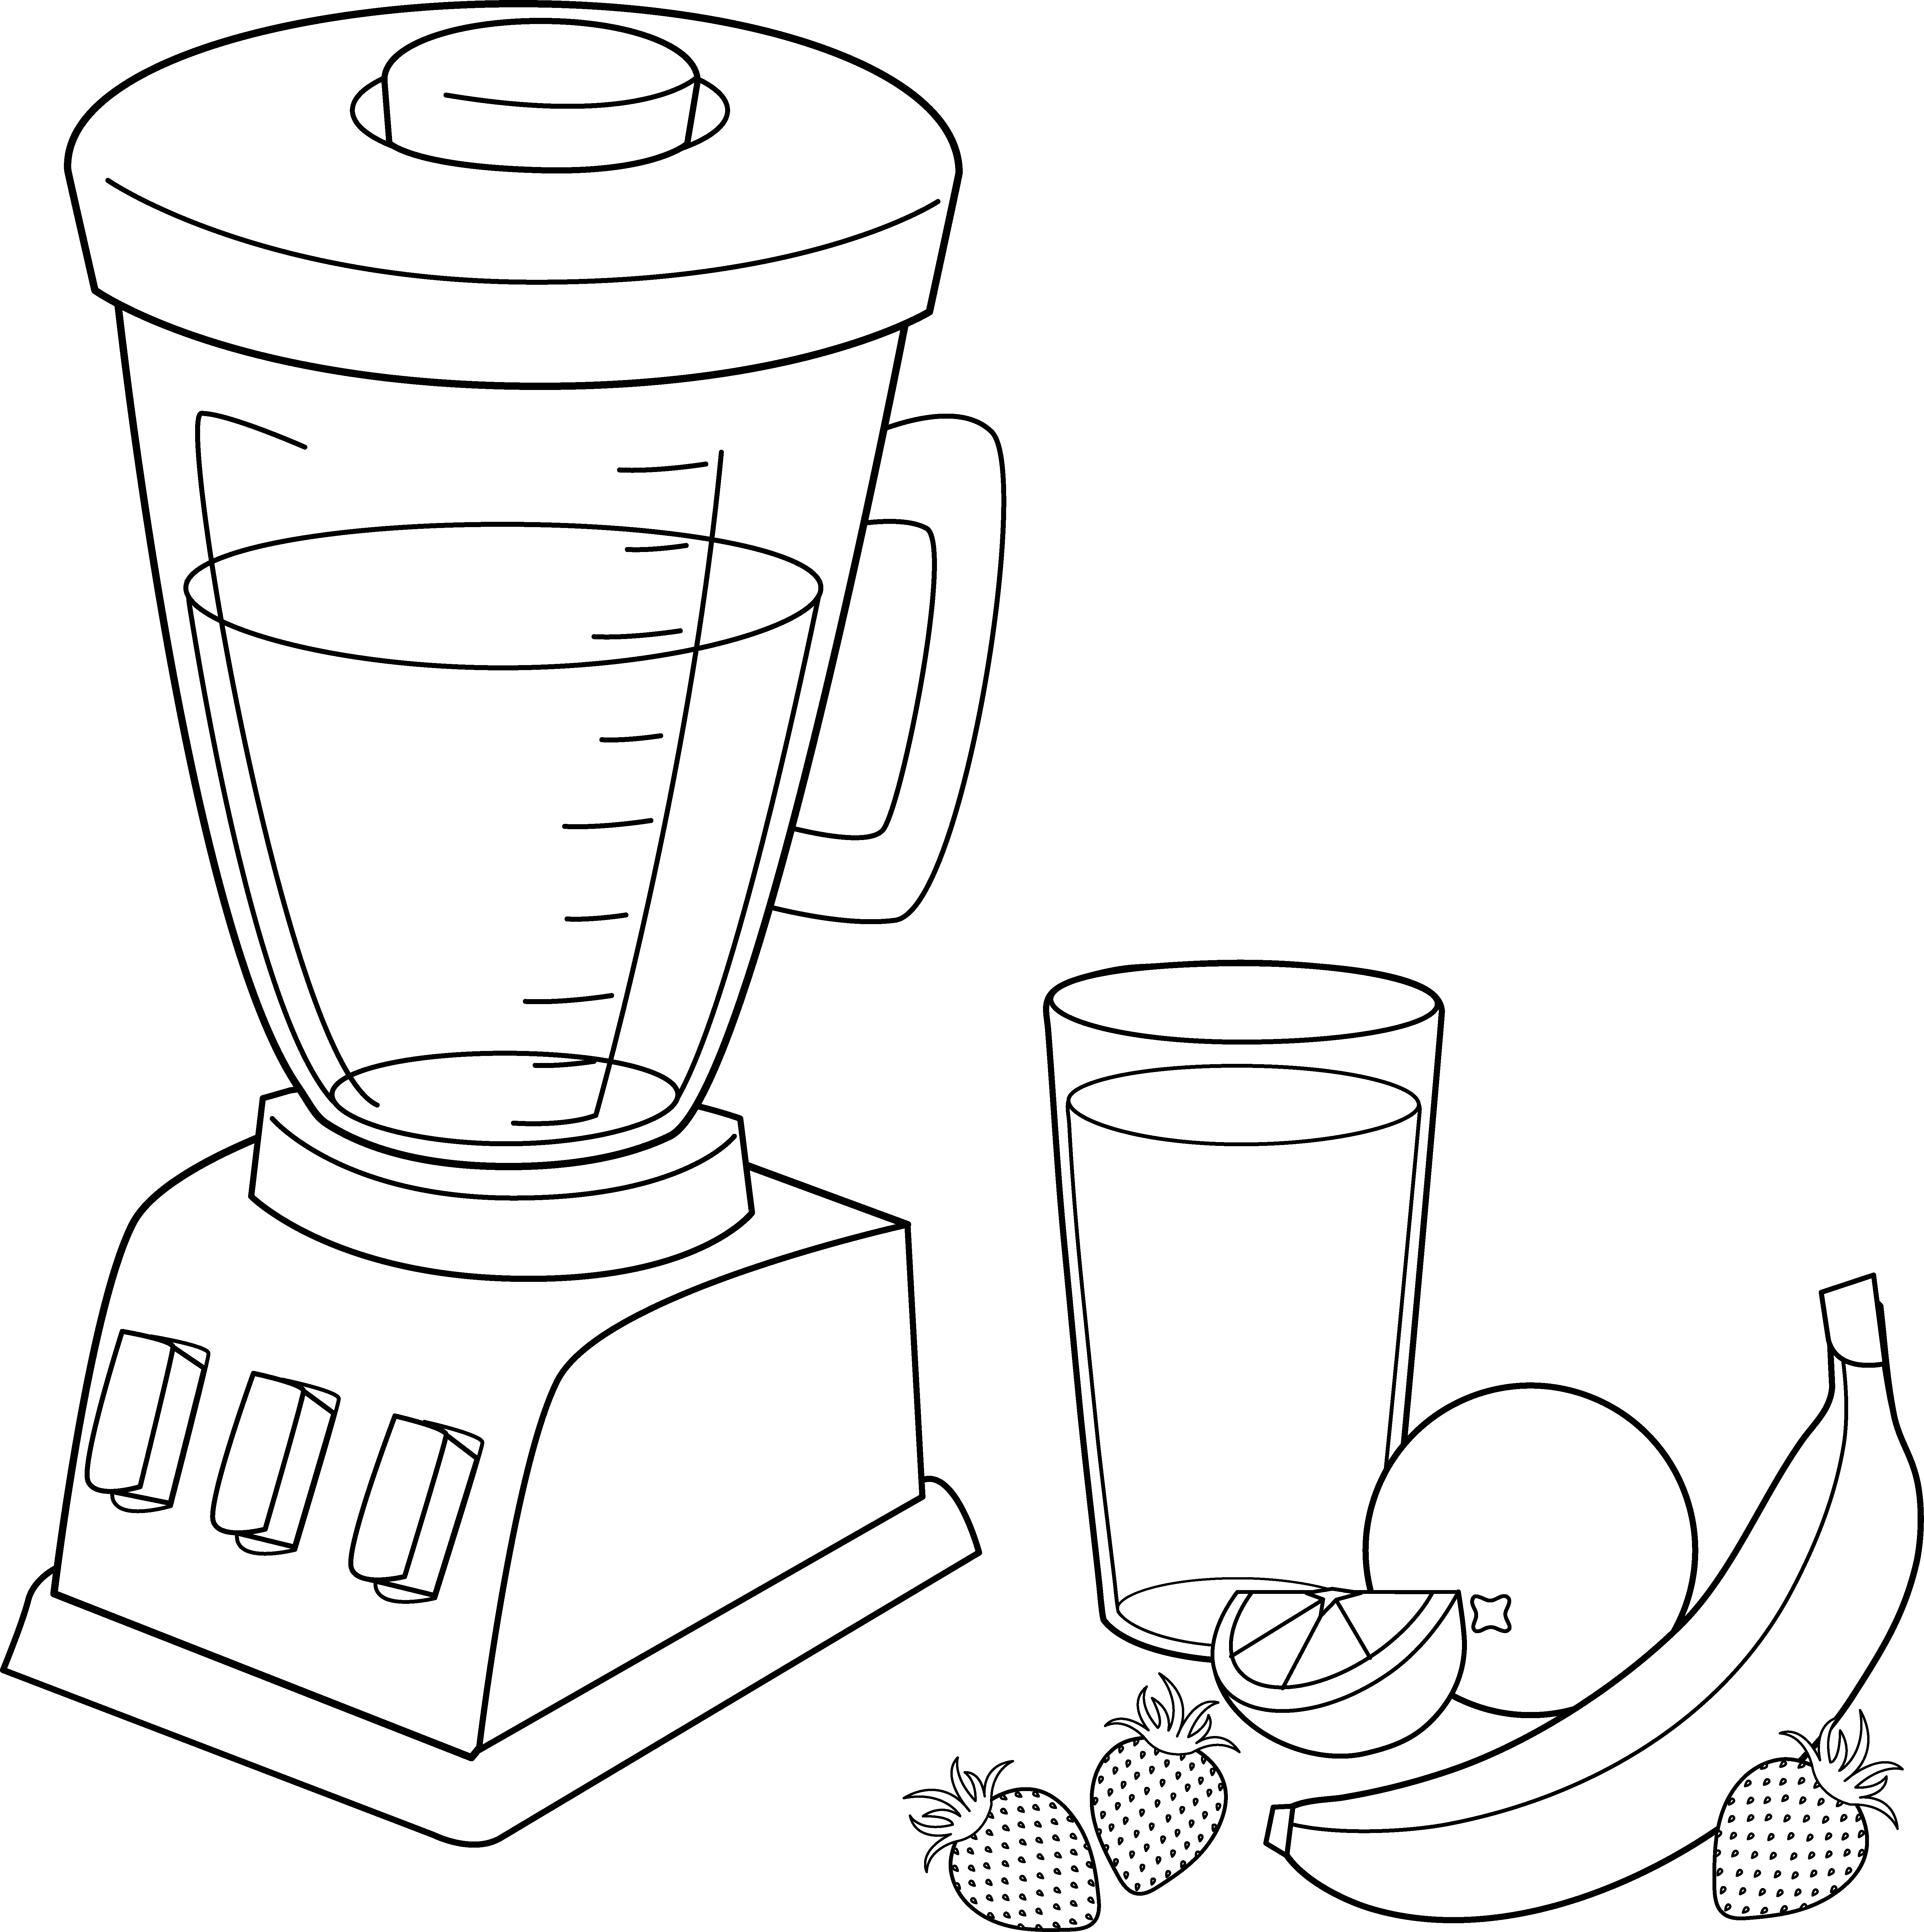 Free Blender Clipart Black And White, Download Free Clip Art.